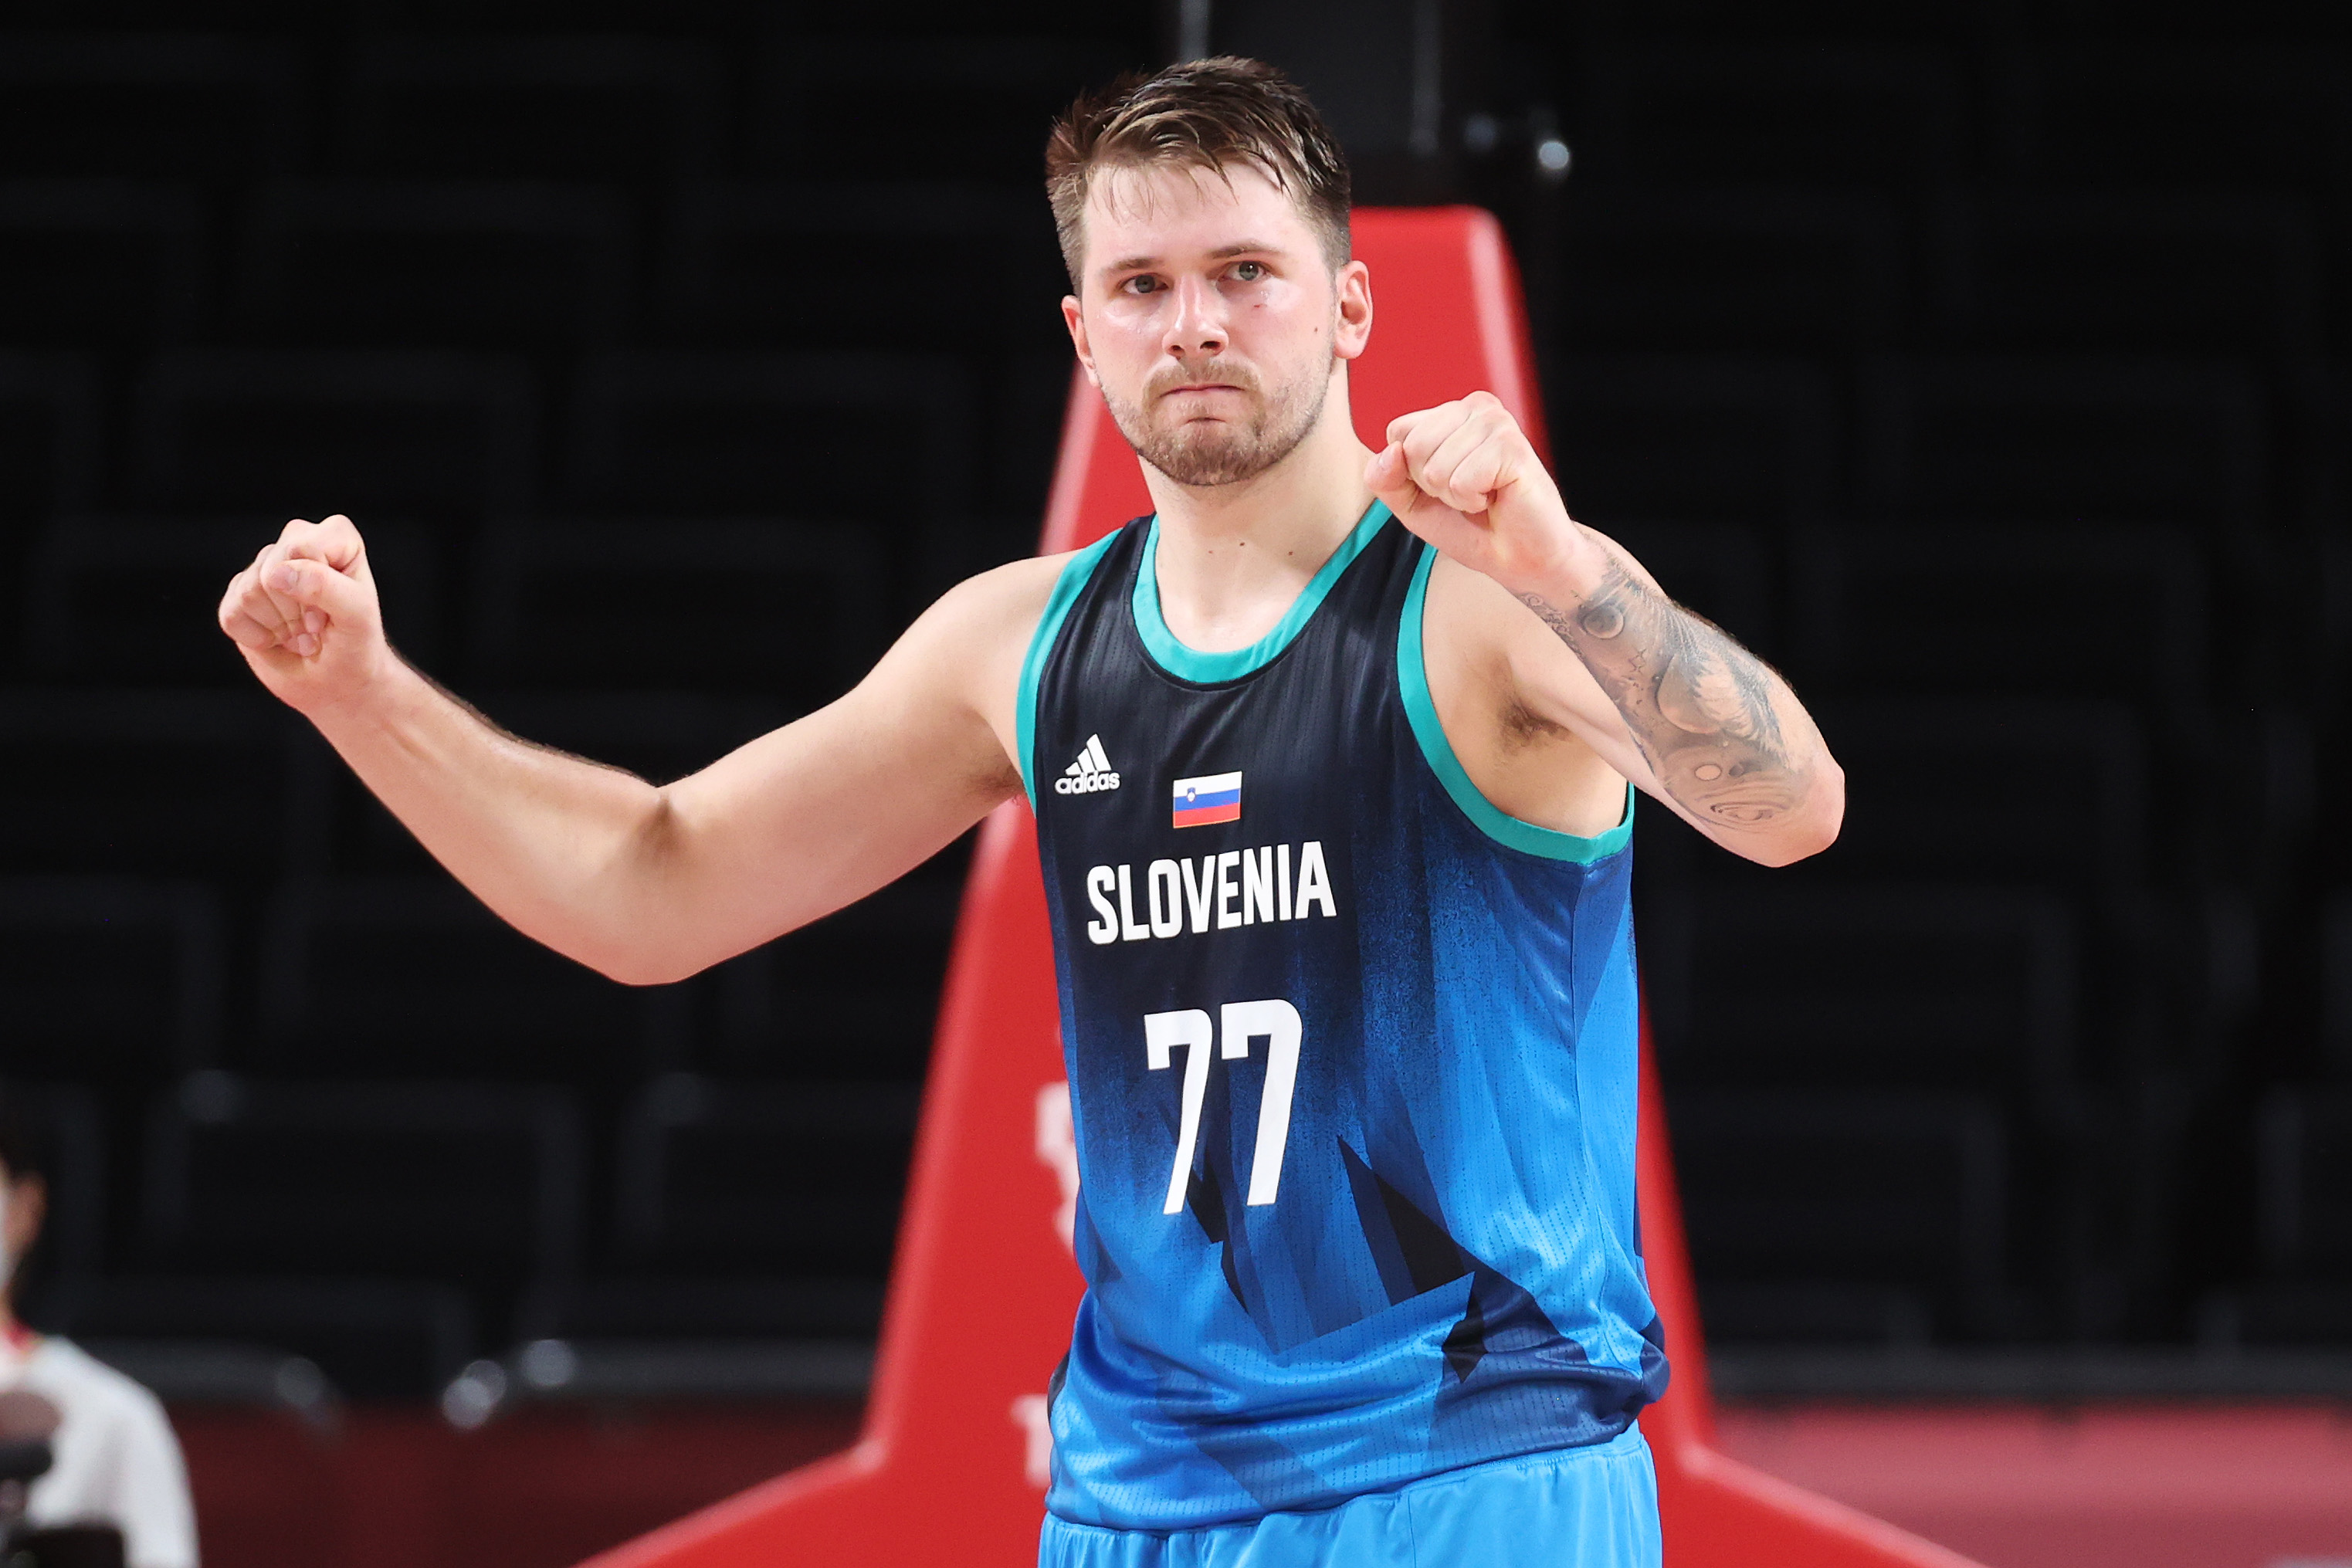 Slovenia's Luka Doncic celebrates after winning in the Olympic Games.